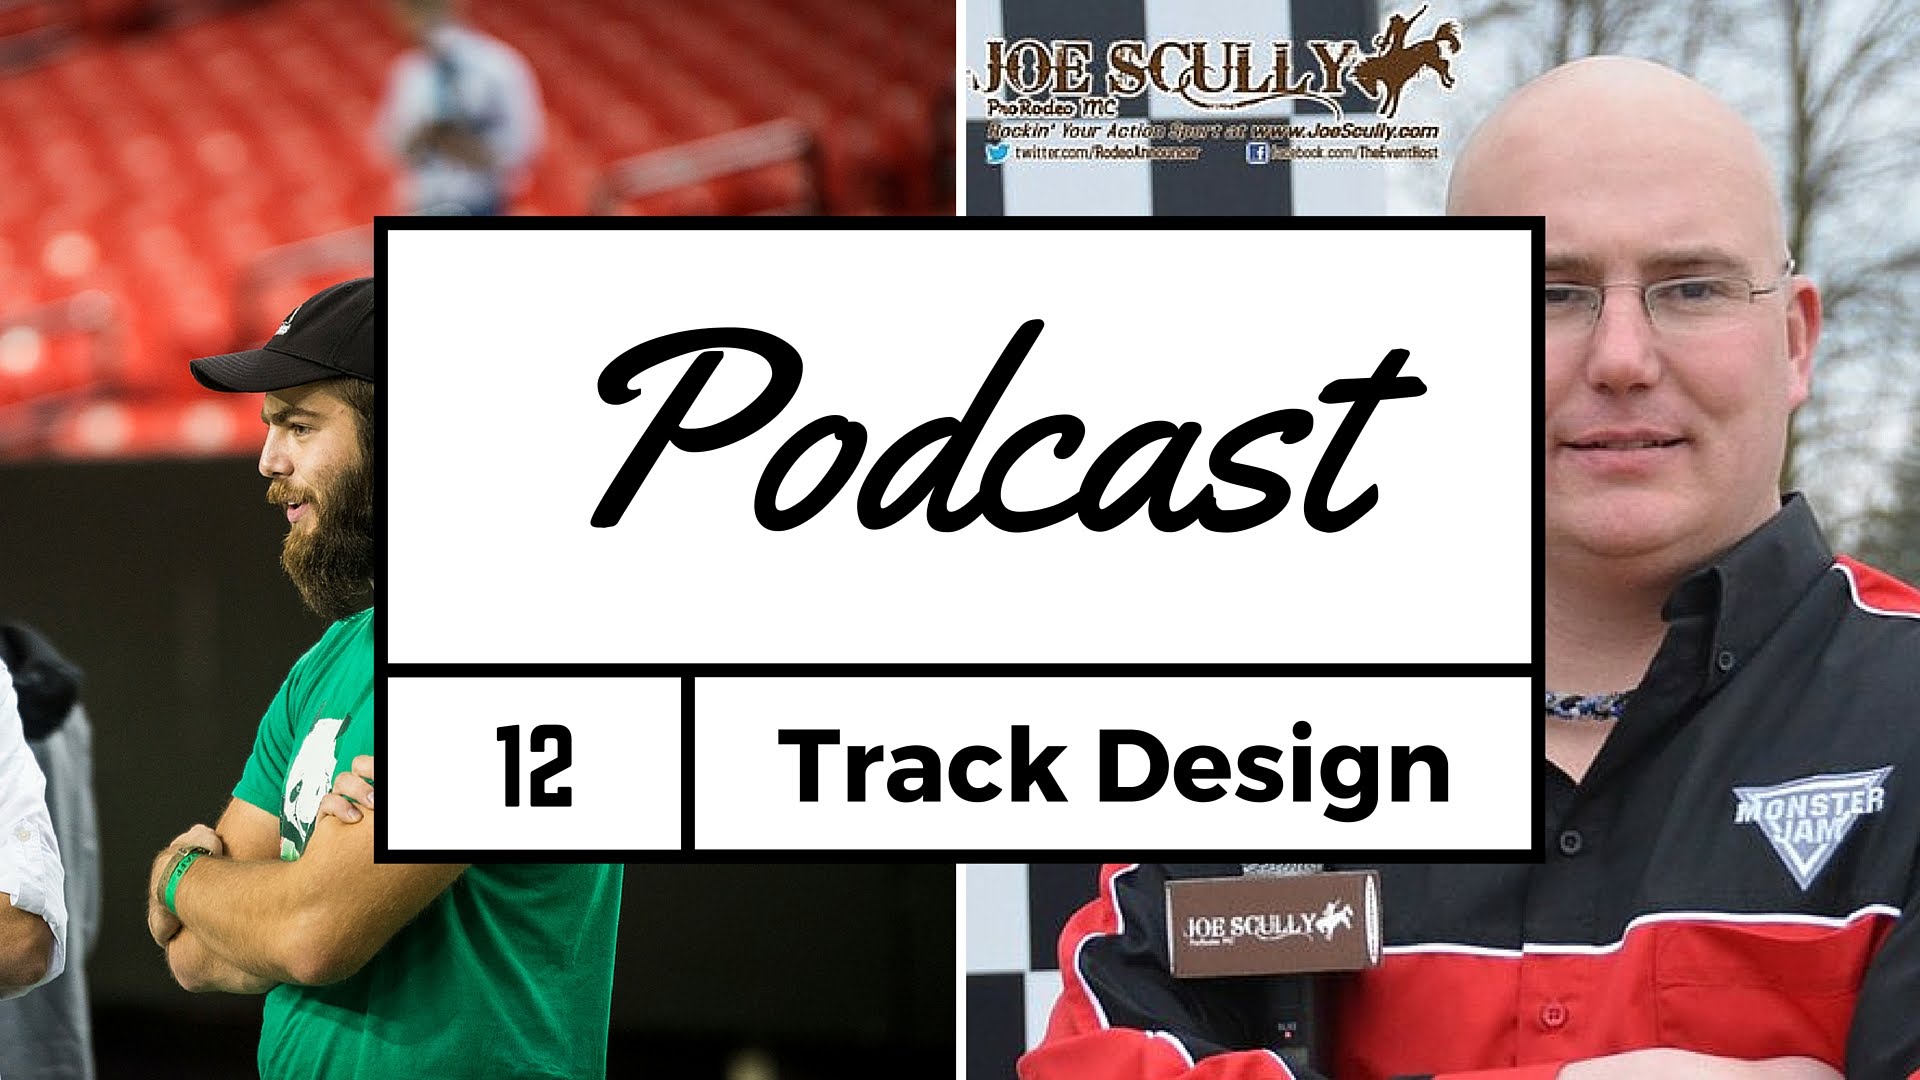 FPV Podcast 12 – Track Design with Joe Scully and Bulbufet FPV